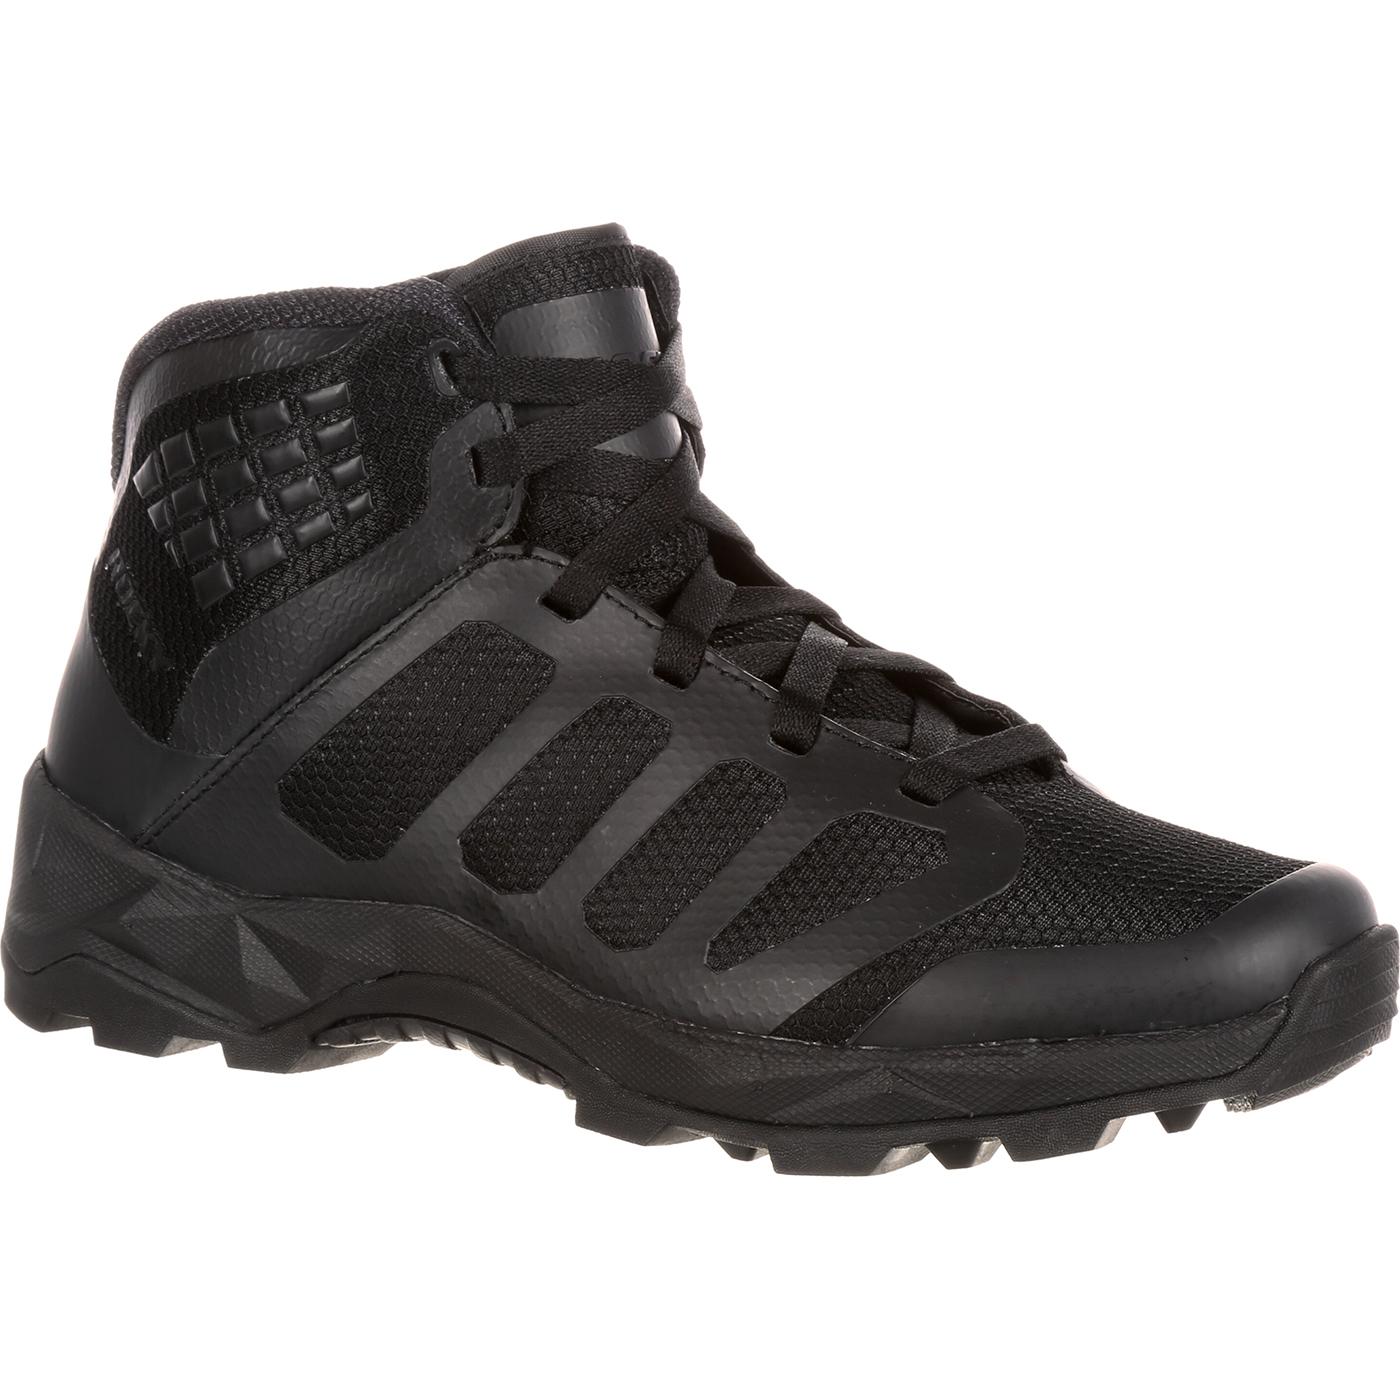 Rocky Elements of Service: Black Athletic Hiker Public Service Boot